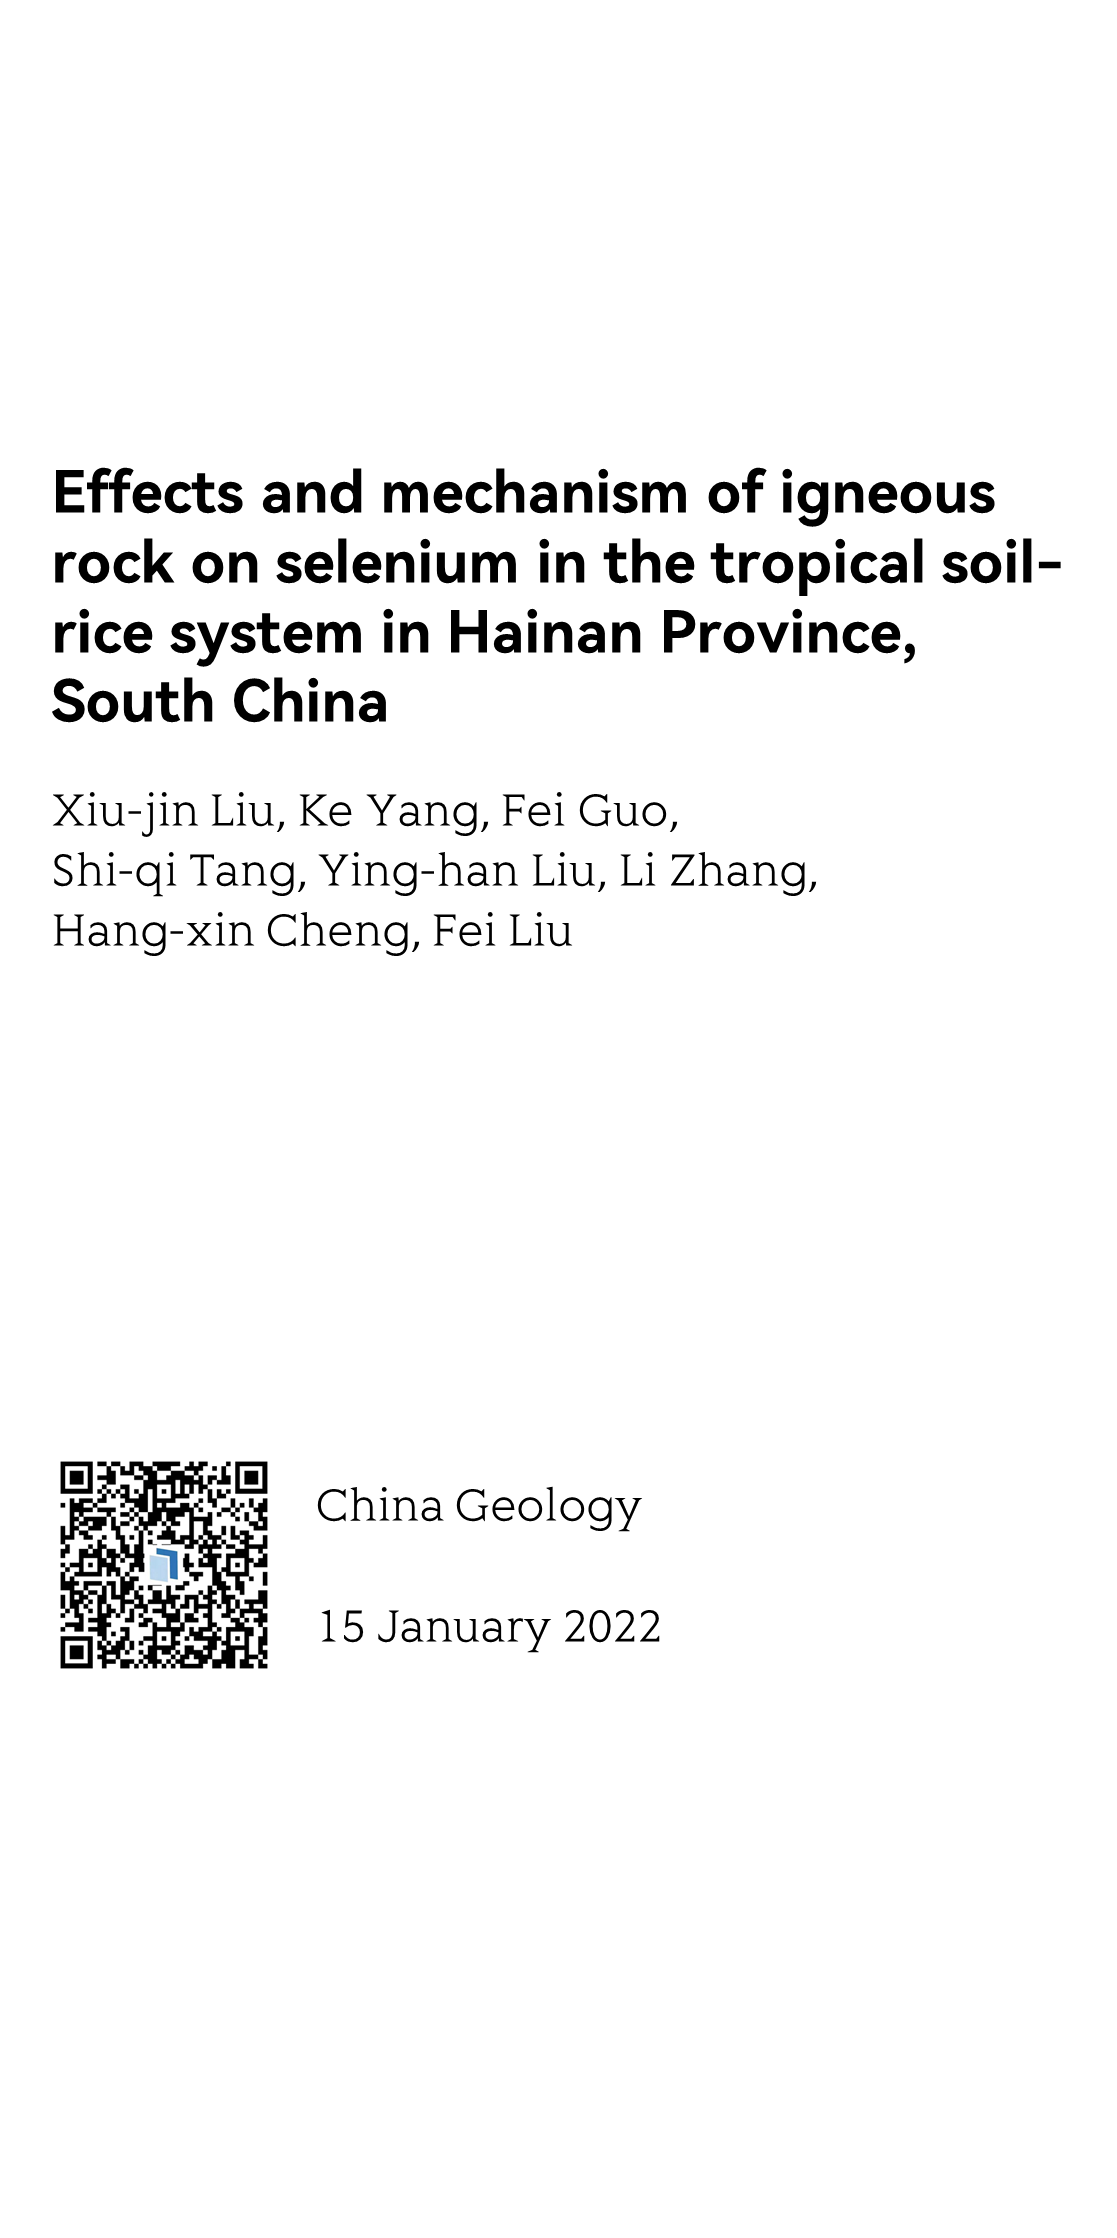 Effects and mechanism of igneous rock on selenium in the tropical soil-rice system in Hainan Province, South China_1